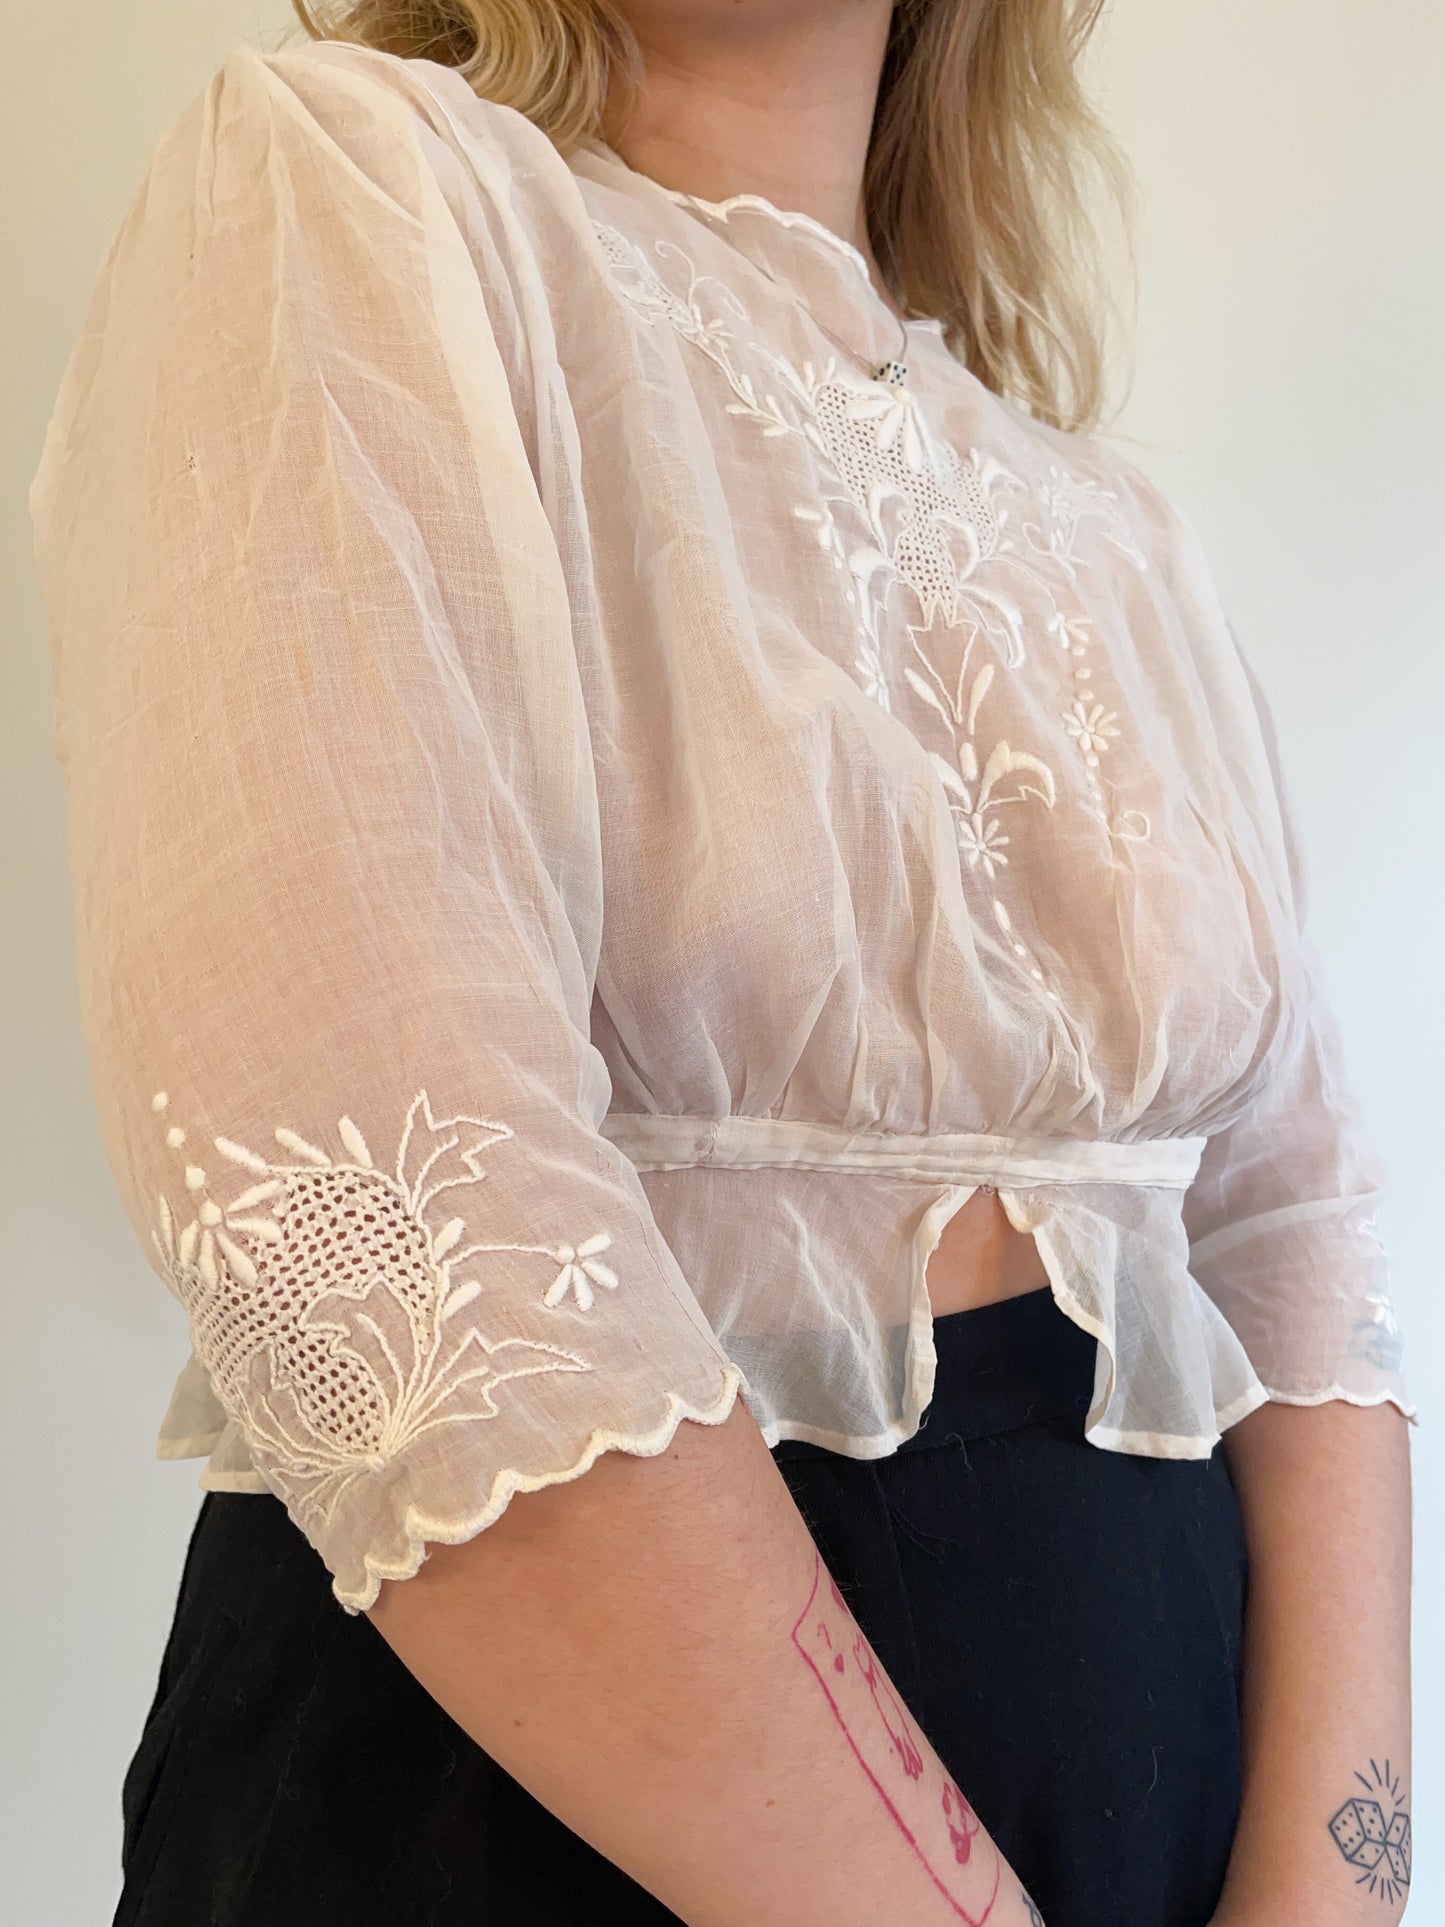 S Antique Edwardian Sheer Embroidered Blouse